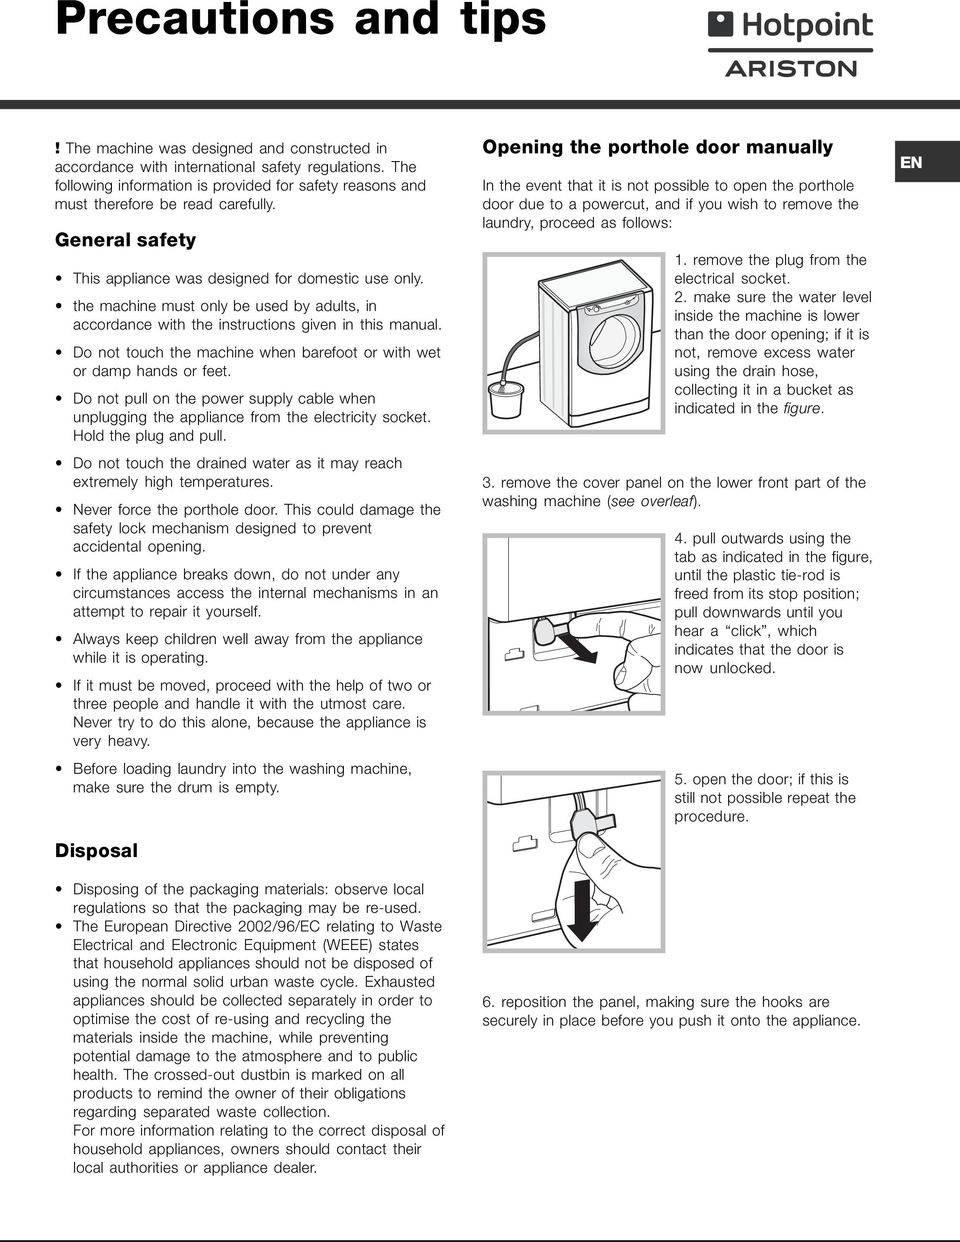 the machine must only be used by adults, in accordance with the instructions given in this manual. Do not touch the machine when barefoot or with wet or damp hands or feet.